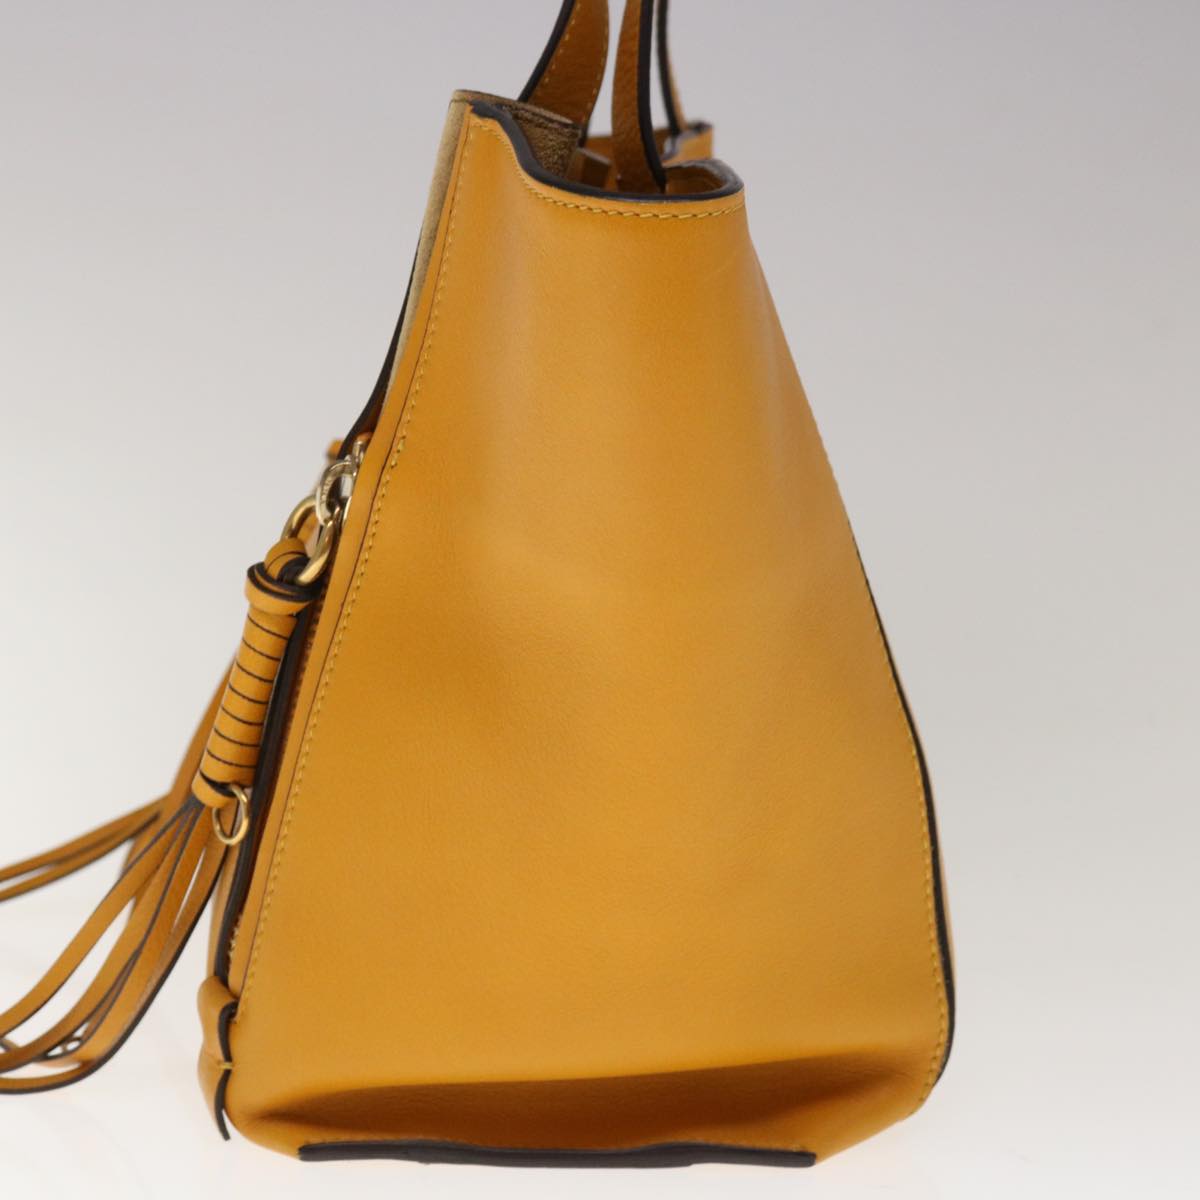 Chloe Tote Bag Leather Yellow Auth 65259